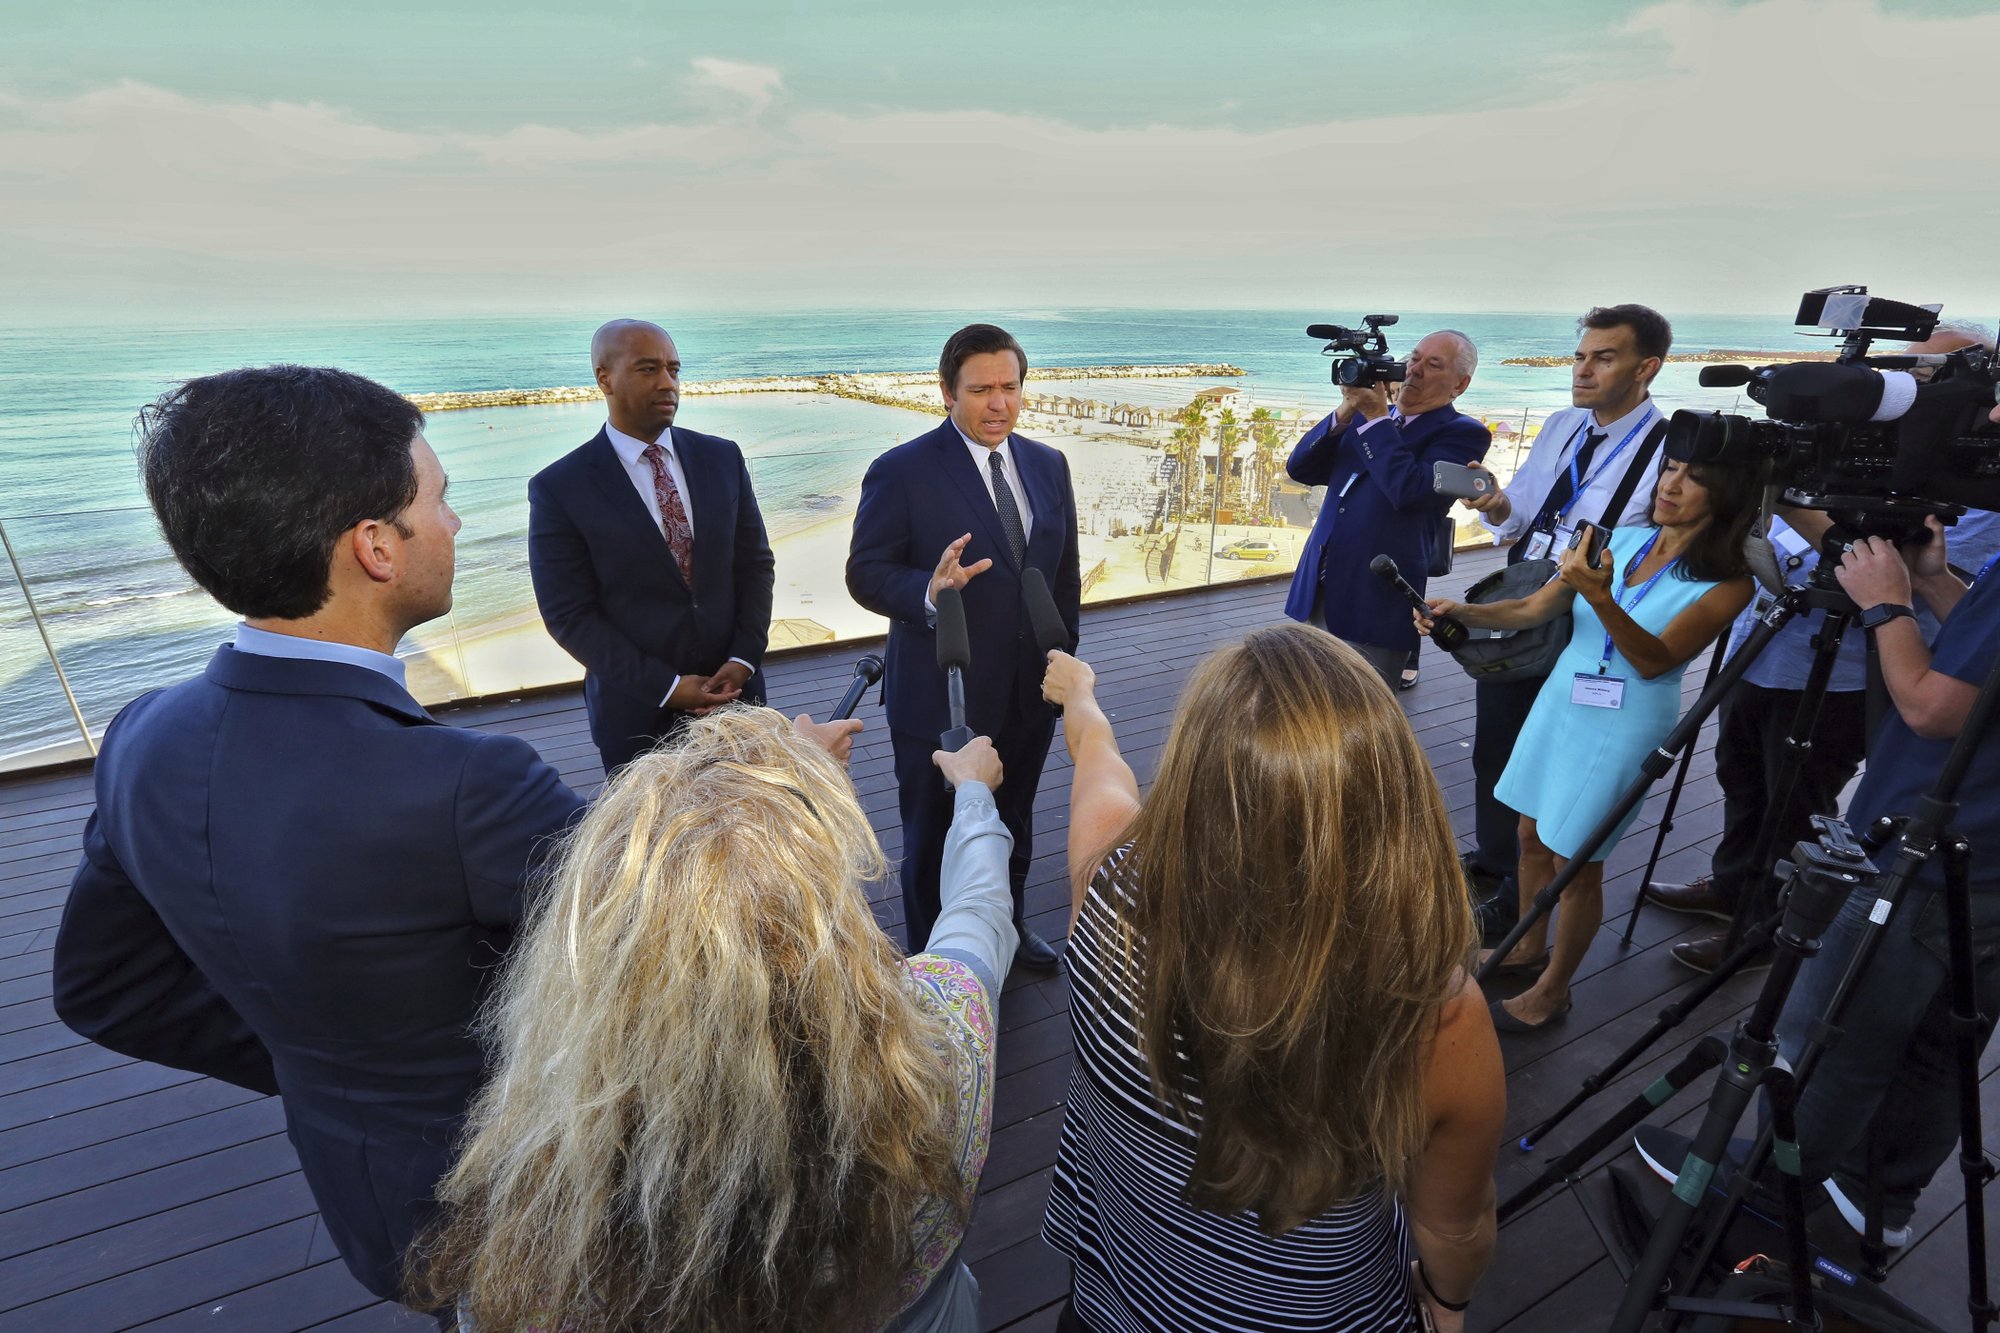 With the Mediterranean Sea as a backdrop, Florida Gov. Ron DeSantis speaks to reporters Monday, May 27, 2019, ahead of the first full day of a Florida trade delegation trip to Israel. DeSantis is leading a delegation on a four-day trade mission to help boost the state's economy and solidify its bonds with Israel. (Jeff Schweers/Tallahassee Democrat via AP)